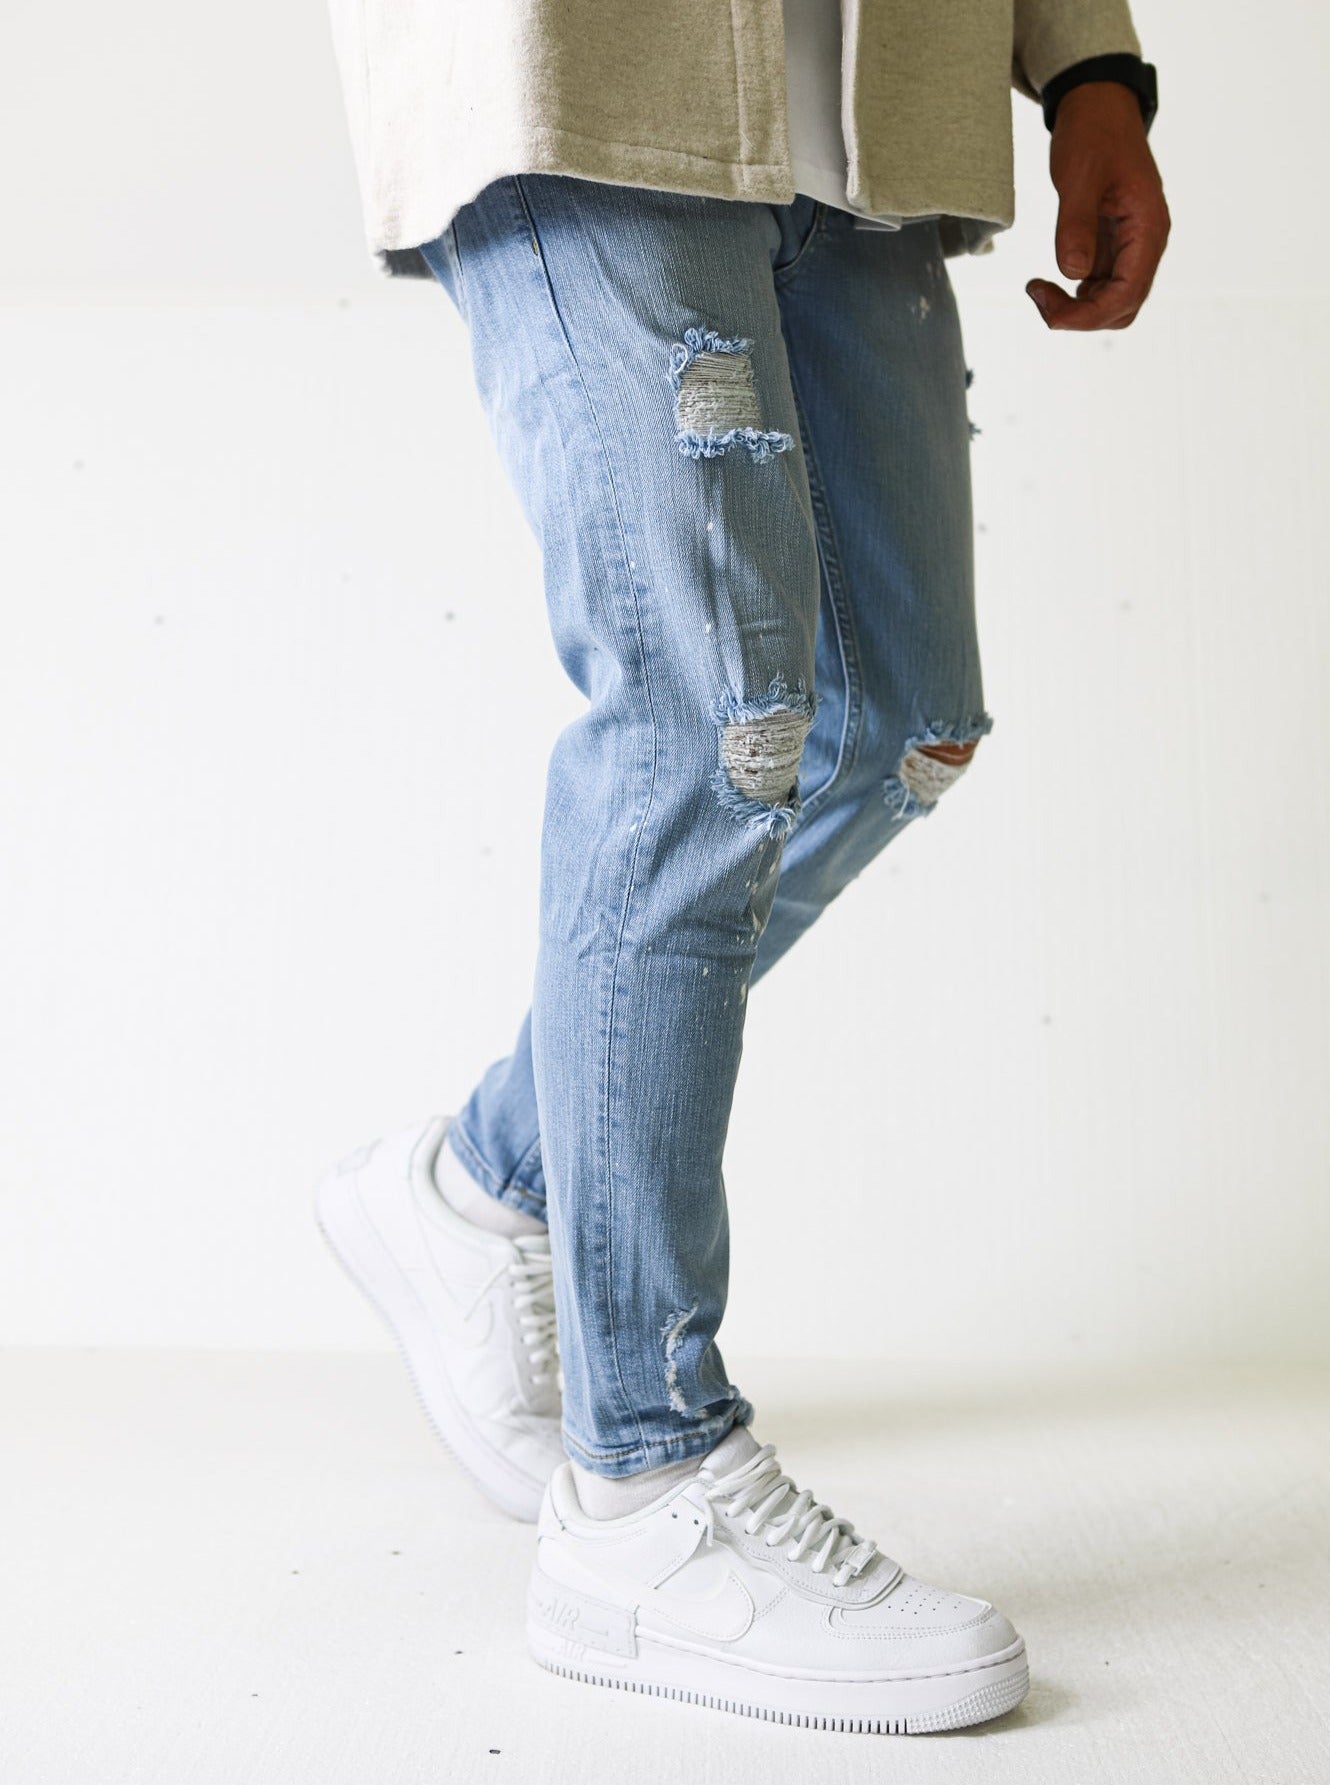 Premium Ripped Light Blue Jeans - UNEFFECTED STUDIOS® - JEANS - UNEFFECTED STUDIOS®